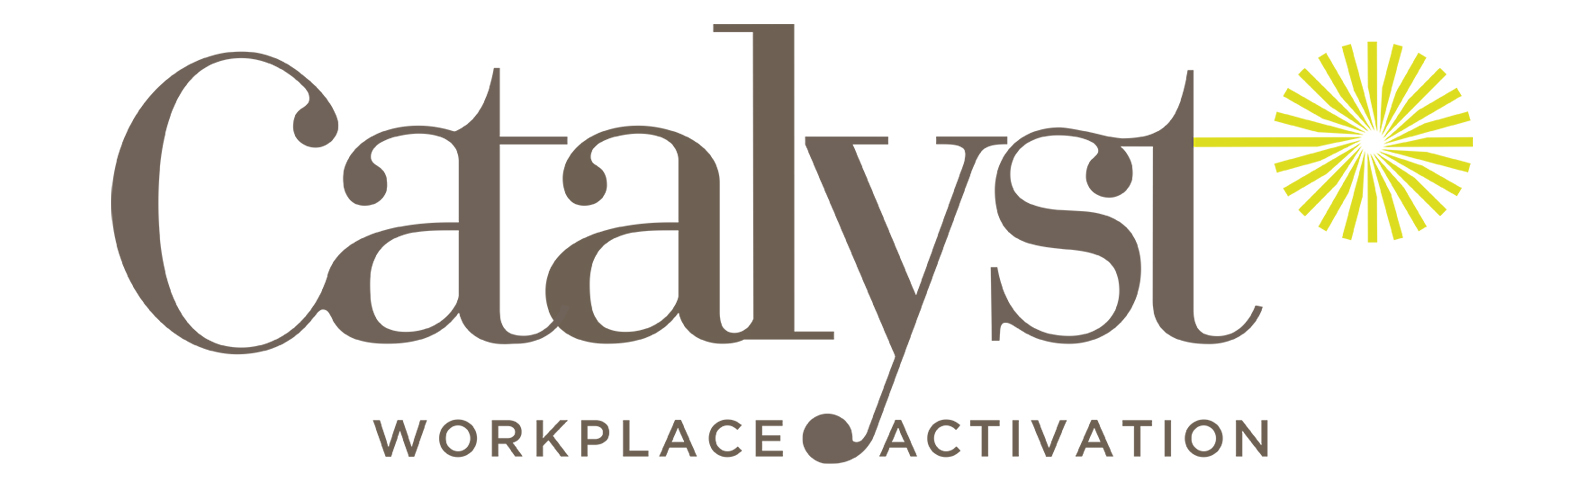 Catalyst Workplace Activation logo